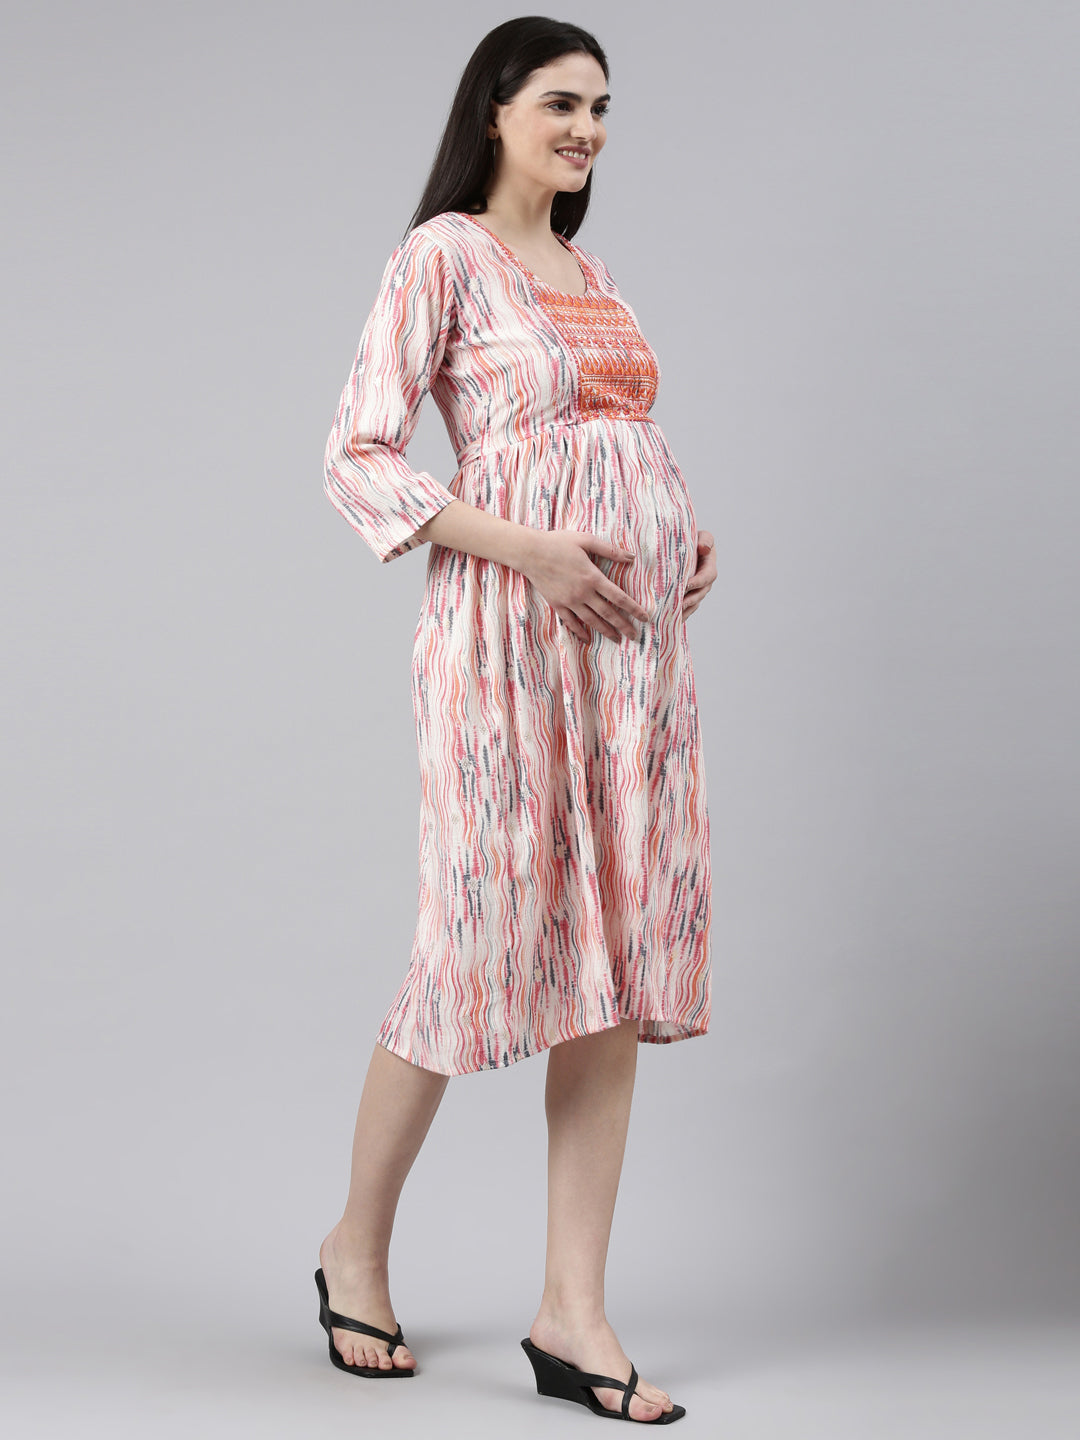 Coral  Maternity And Feeding Dress